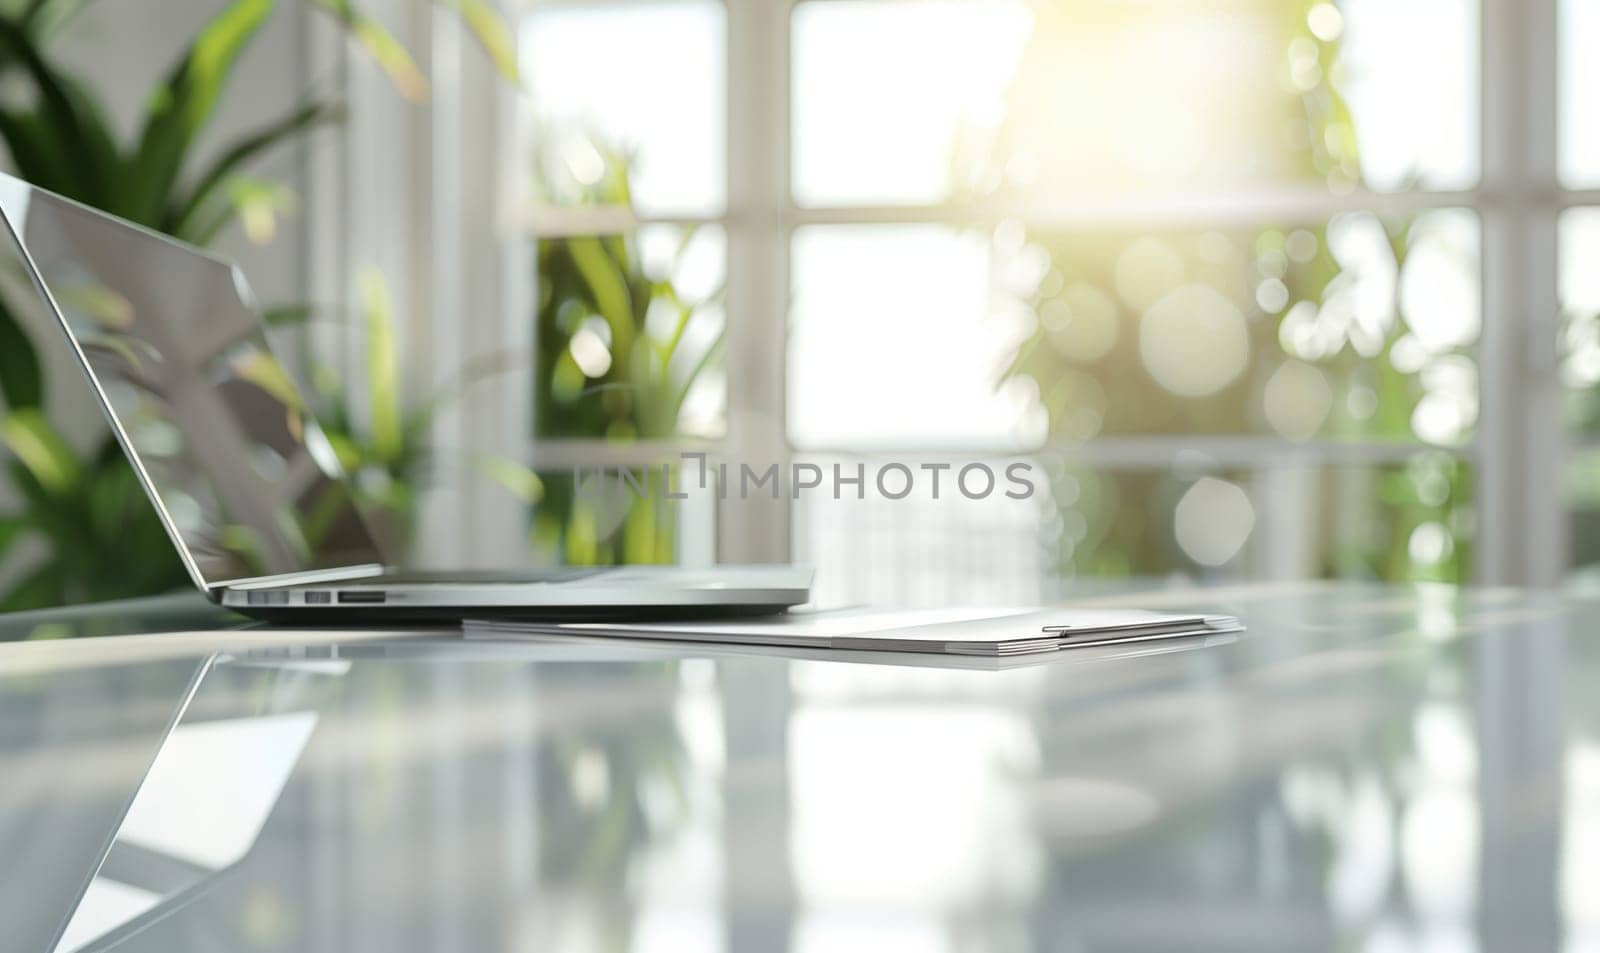 A laptop on a glass table near a window in a sunlit room by richwolf